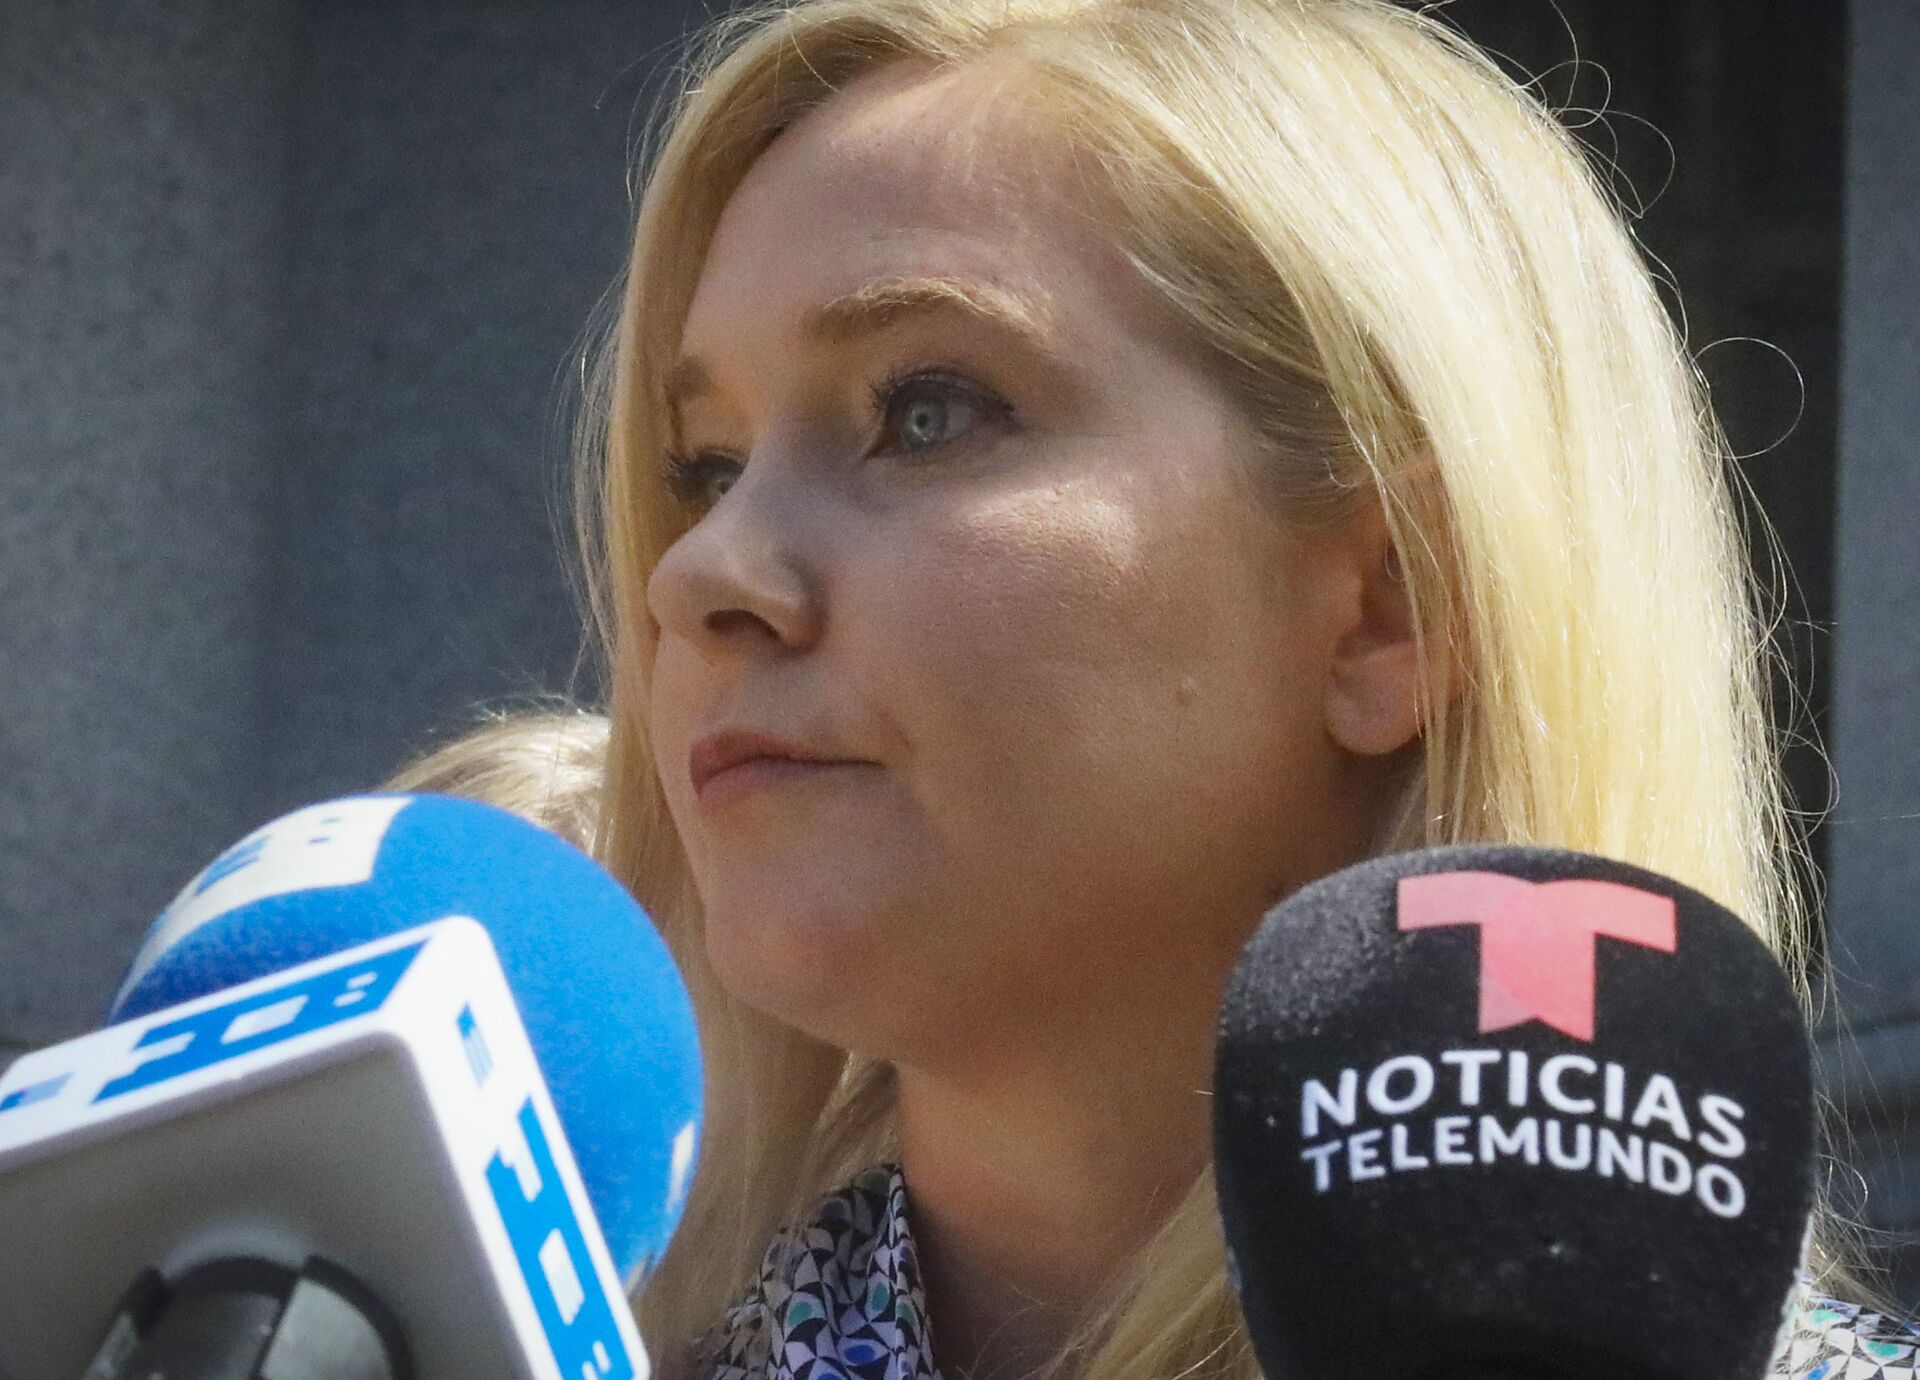 In this Aug. 27, 2019, photo, Virginia Roberts Giuffre, who says she was trafficked by sex offender Jeffrey Epstein, holds a news conference outside a Manhattan court where sexual assault claimants invited by a judge addressed a hearing following Epstein's jailhouse death in New York - Sputnik International, 1920, 07.09.2021